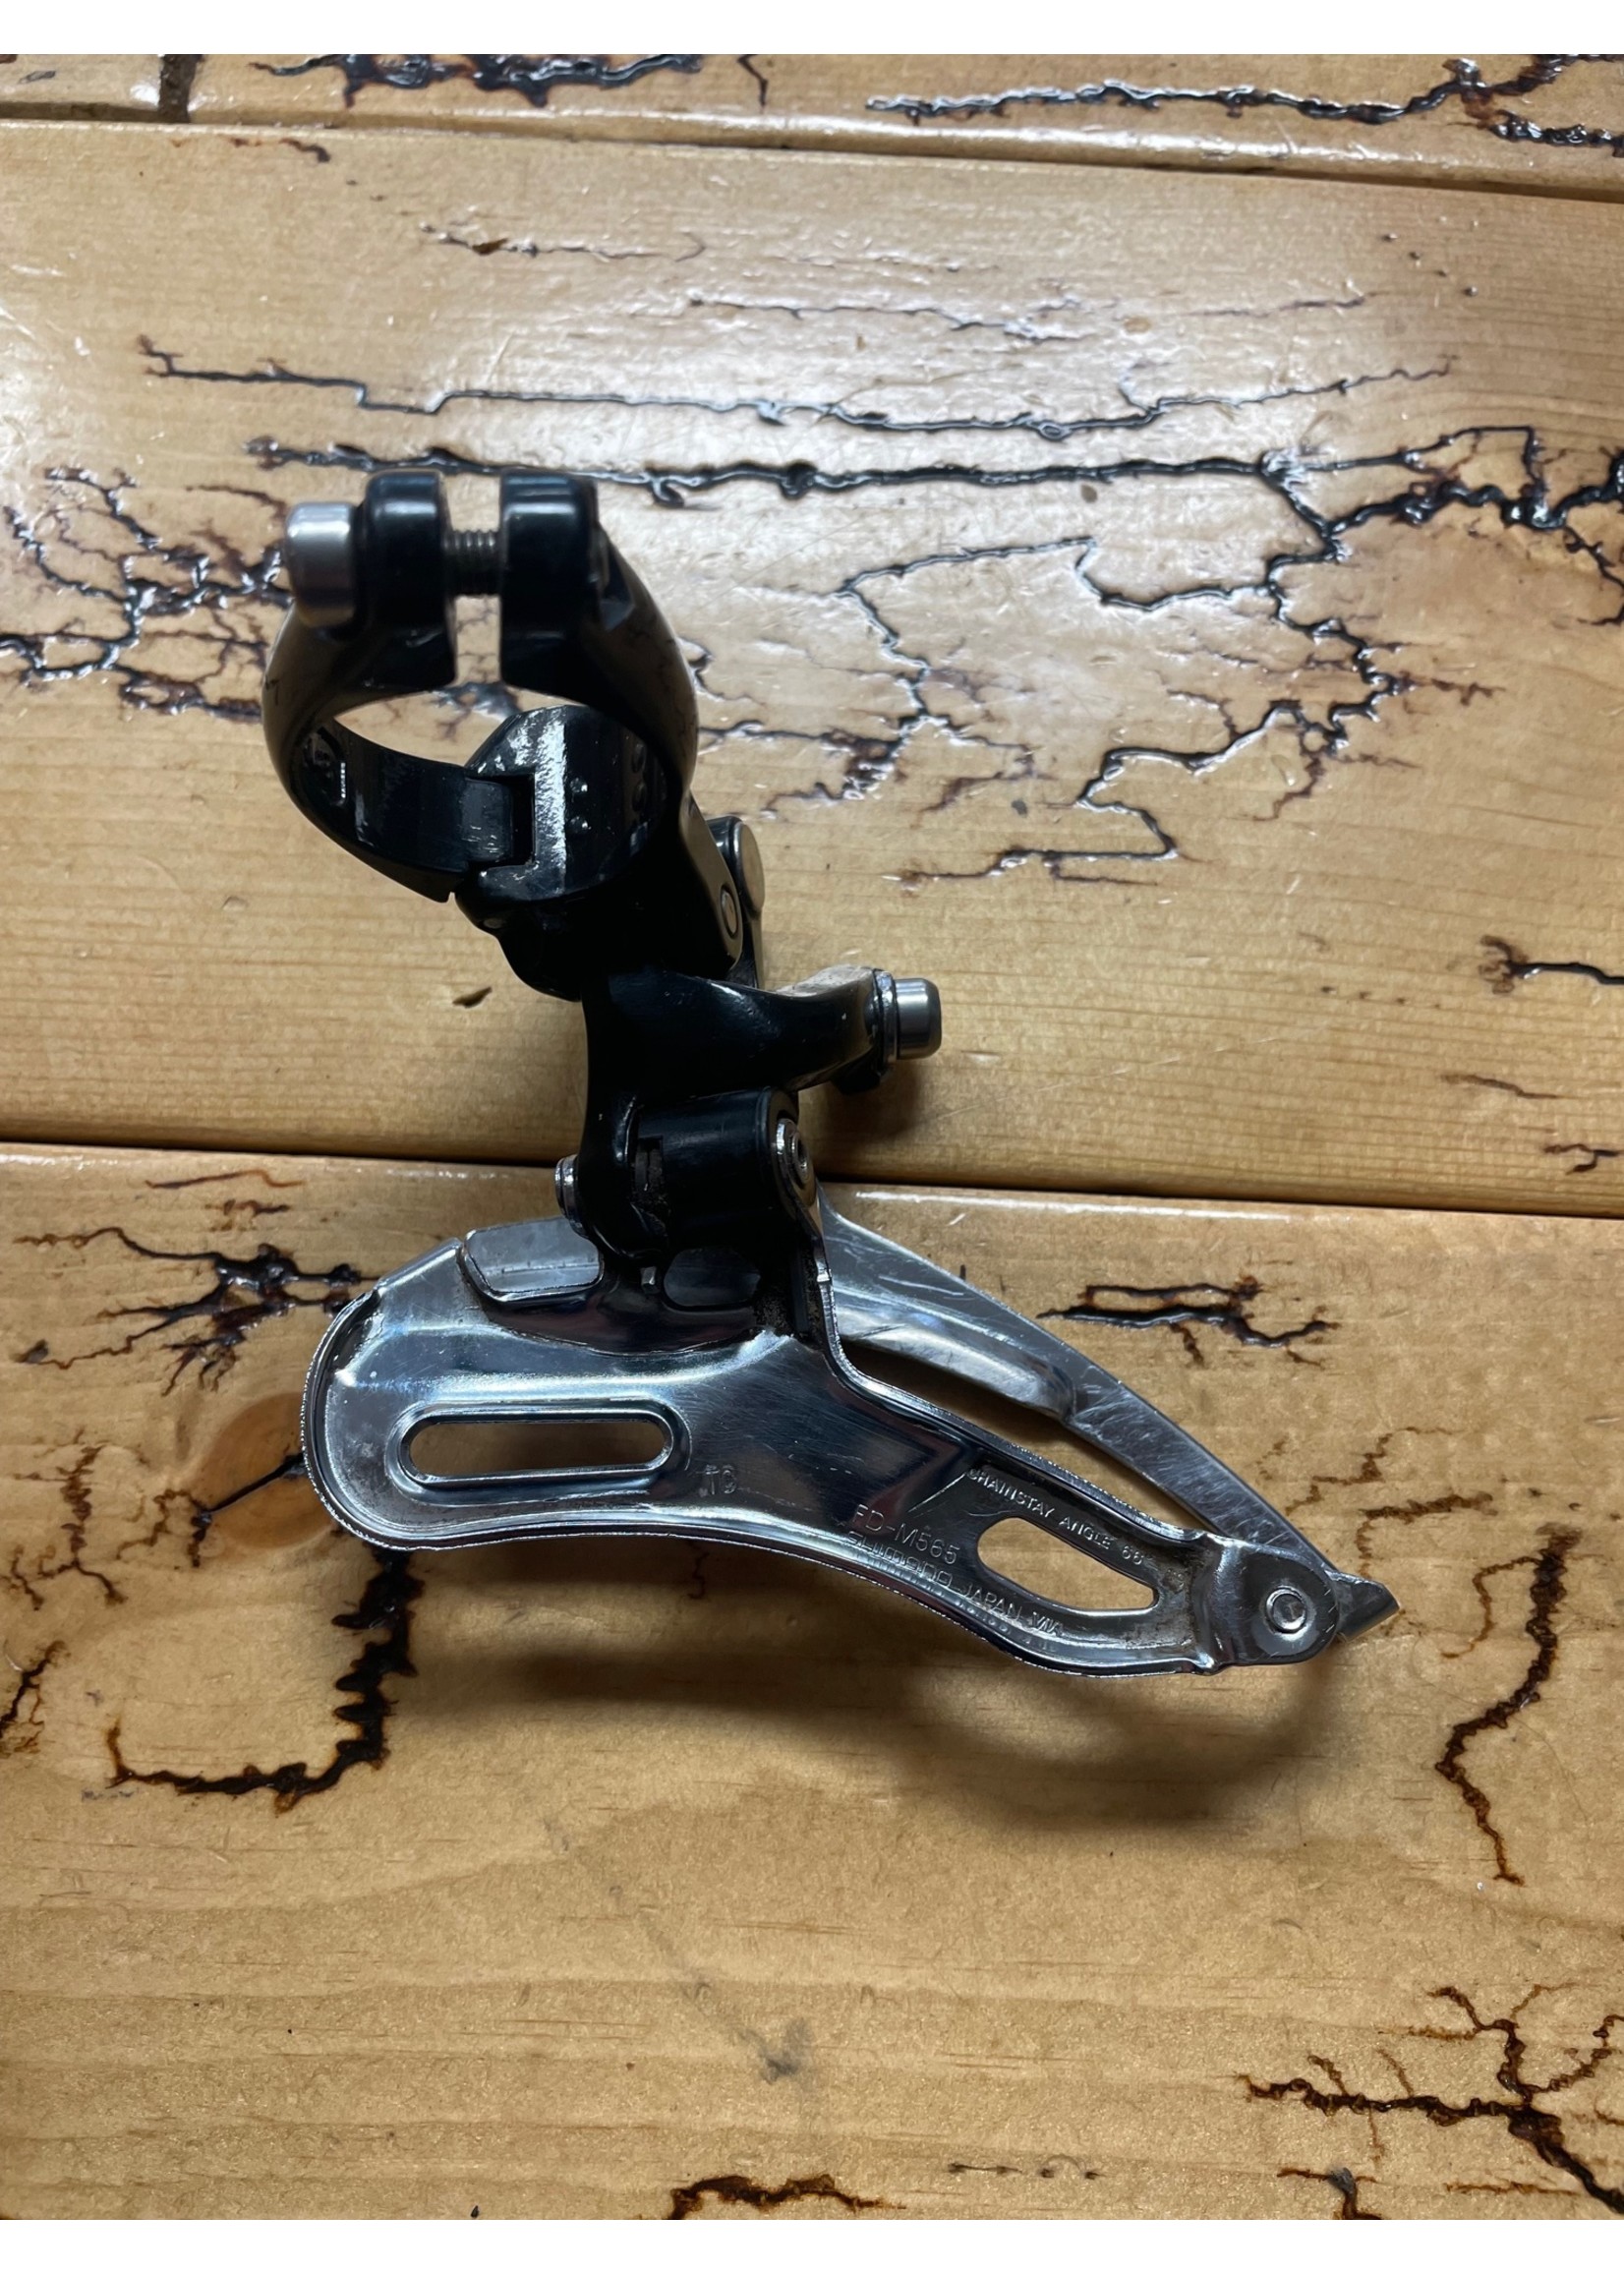 SHIMANO Shimano Deore LX FD-M565 31.8mm Clamp Top Pull Front Derailleur